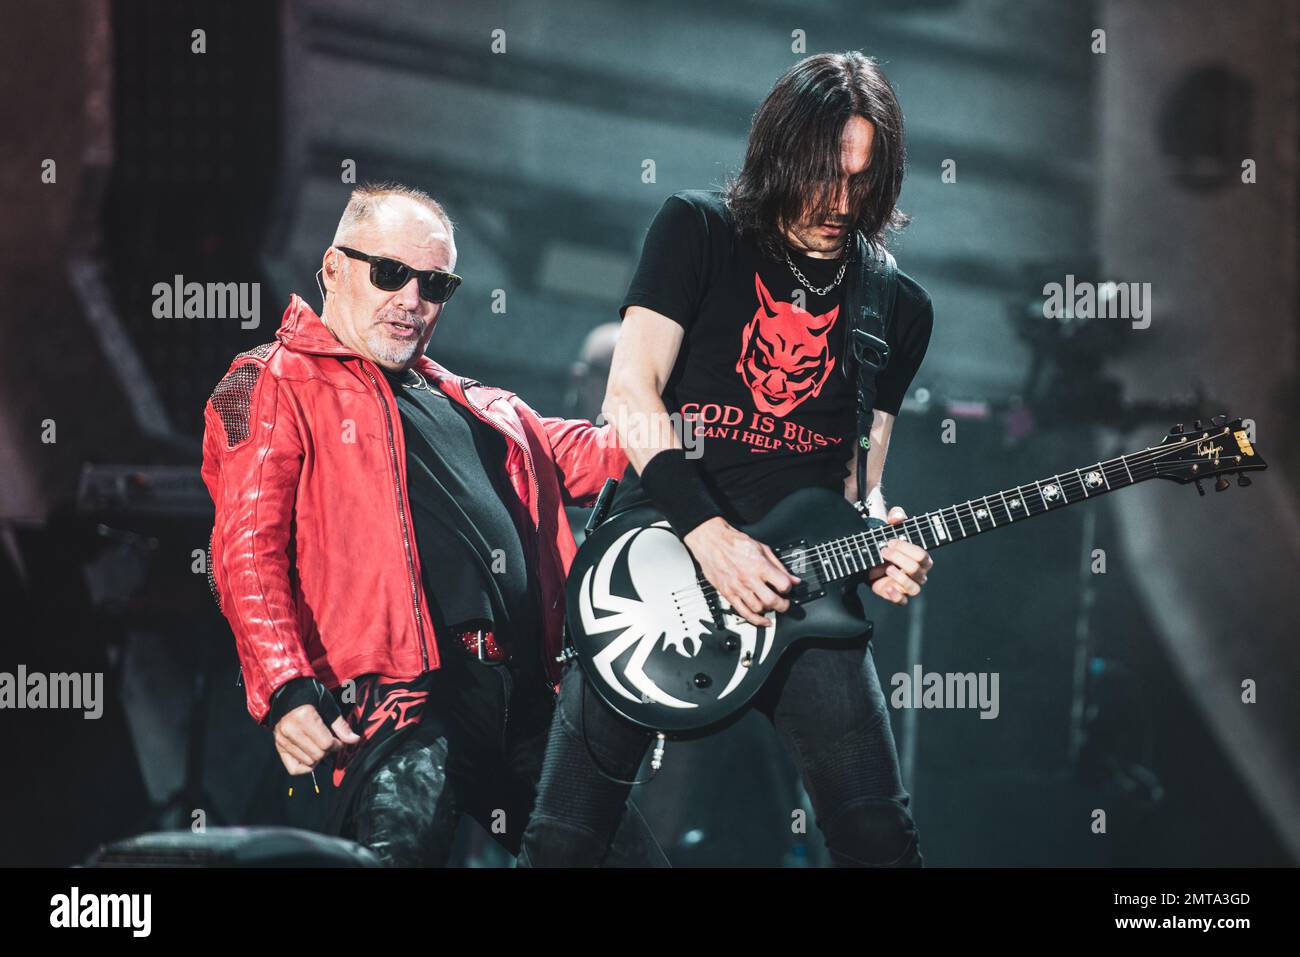 STADIO OLIMPICO, TURIN, ITALY: Vince Pastano (R), guitarist of the Italian rocker Vasco Rossi (L), performing live on stage for the “LIVE KOM” tour Stock Photo